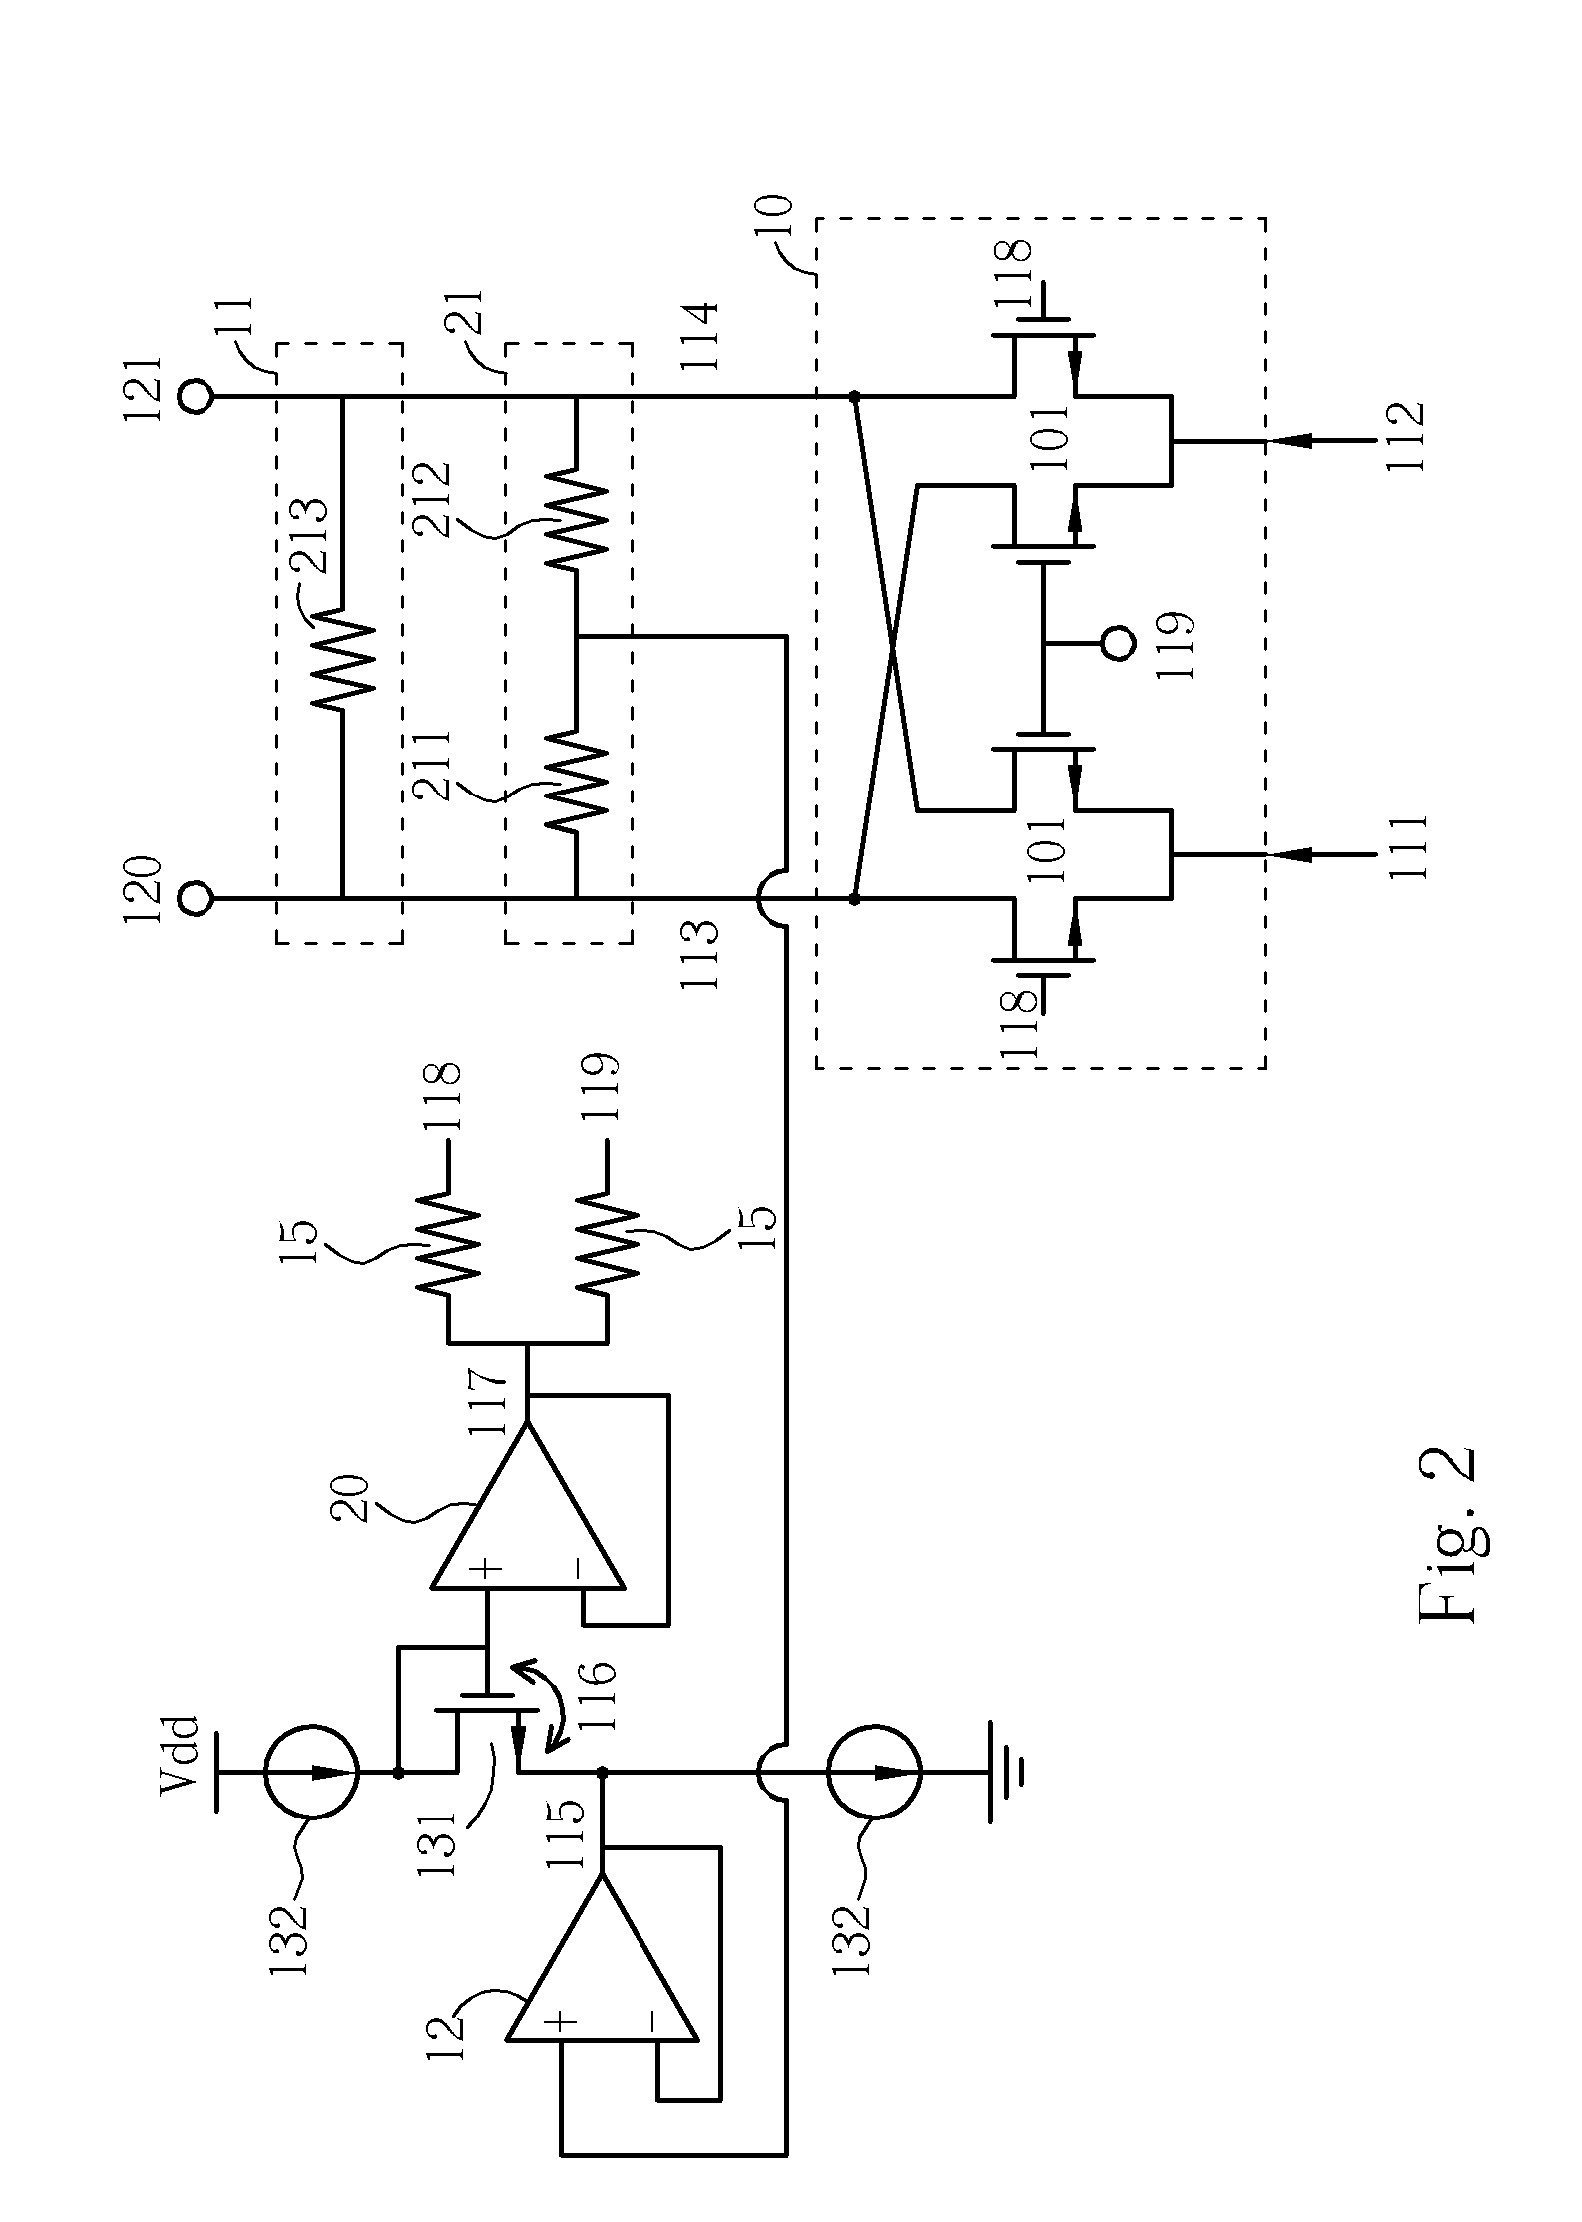 Mixer capable of detecting or controlling common mode voltage thereof